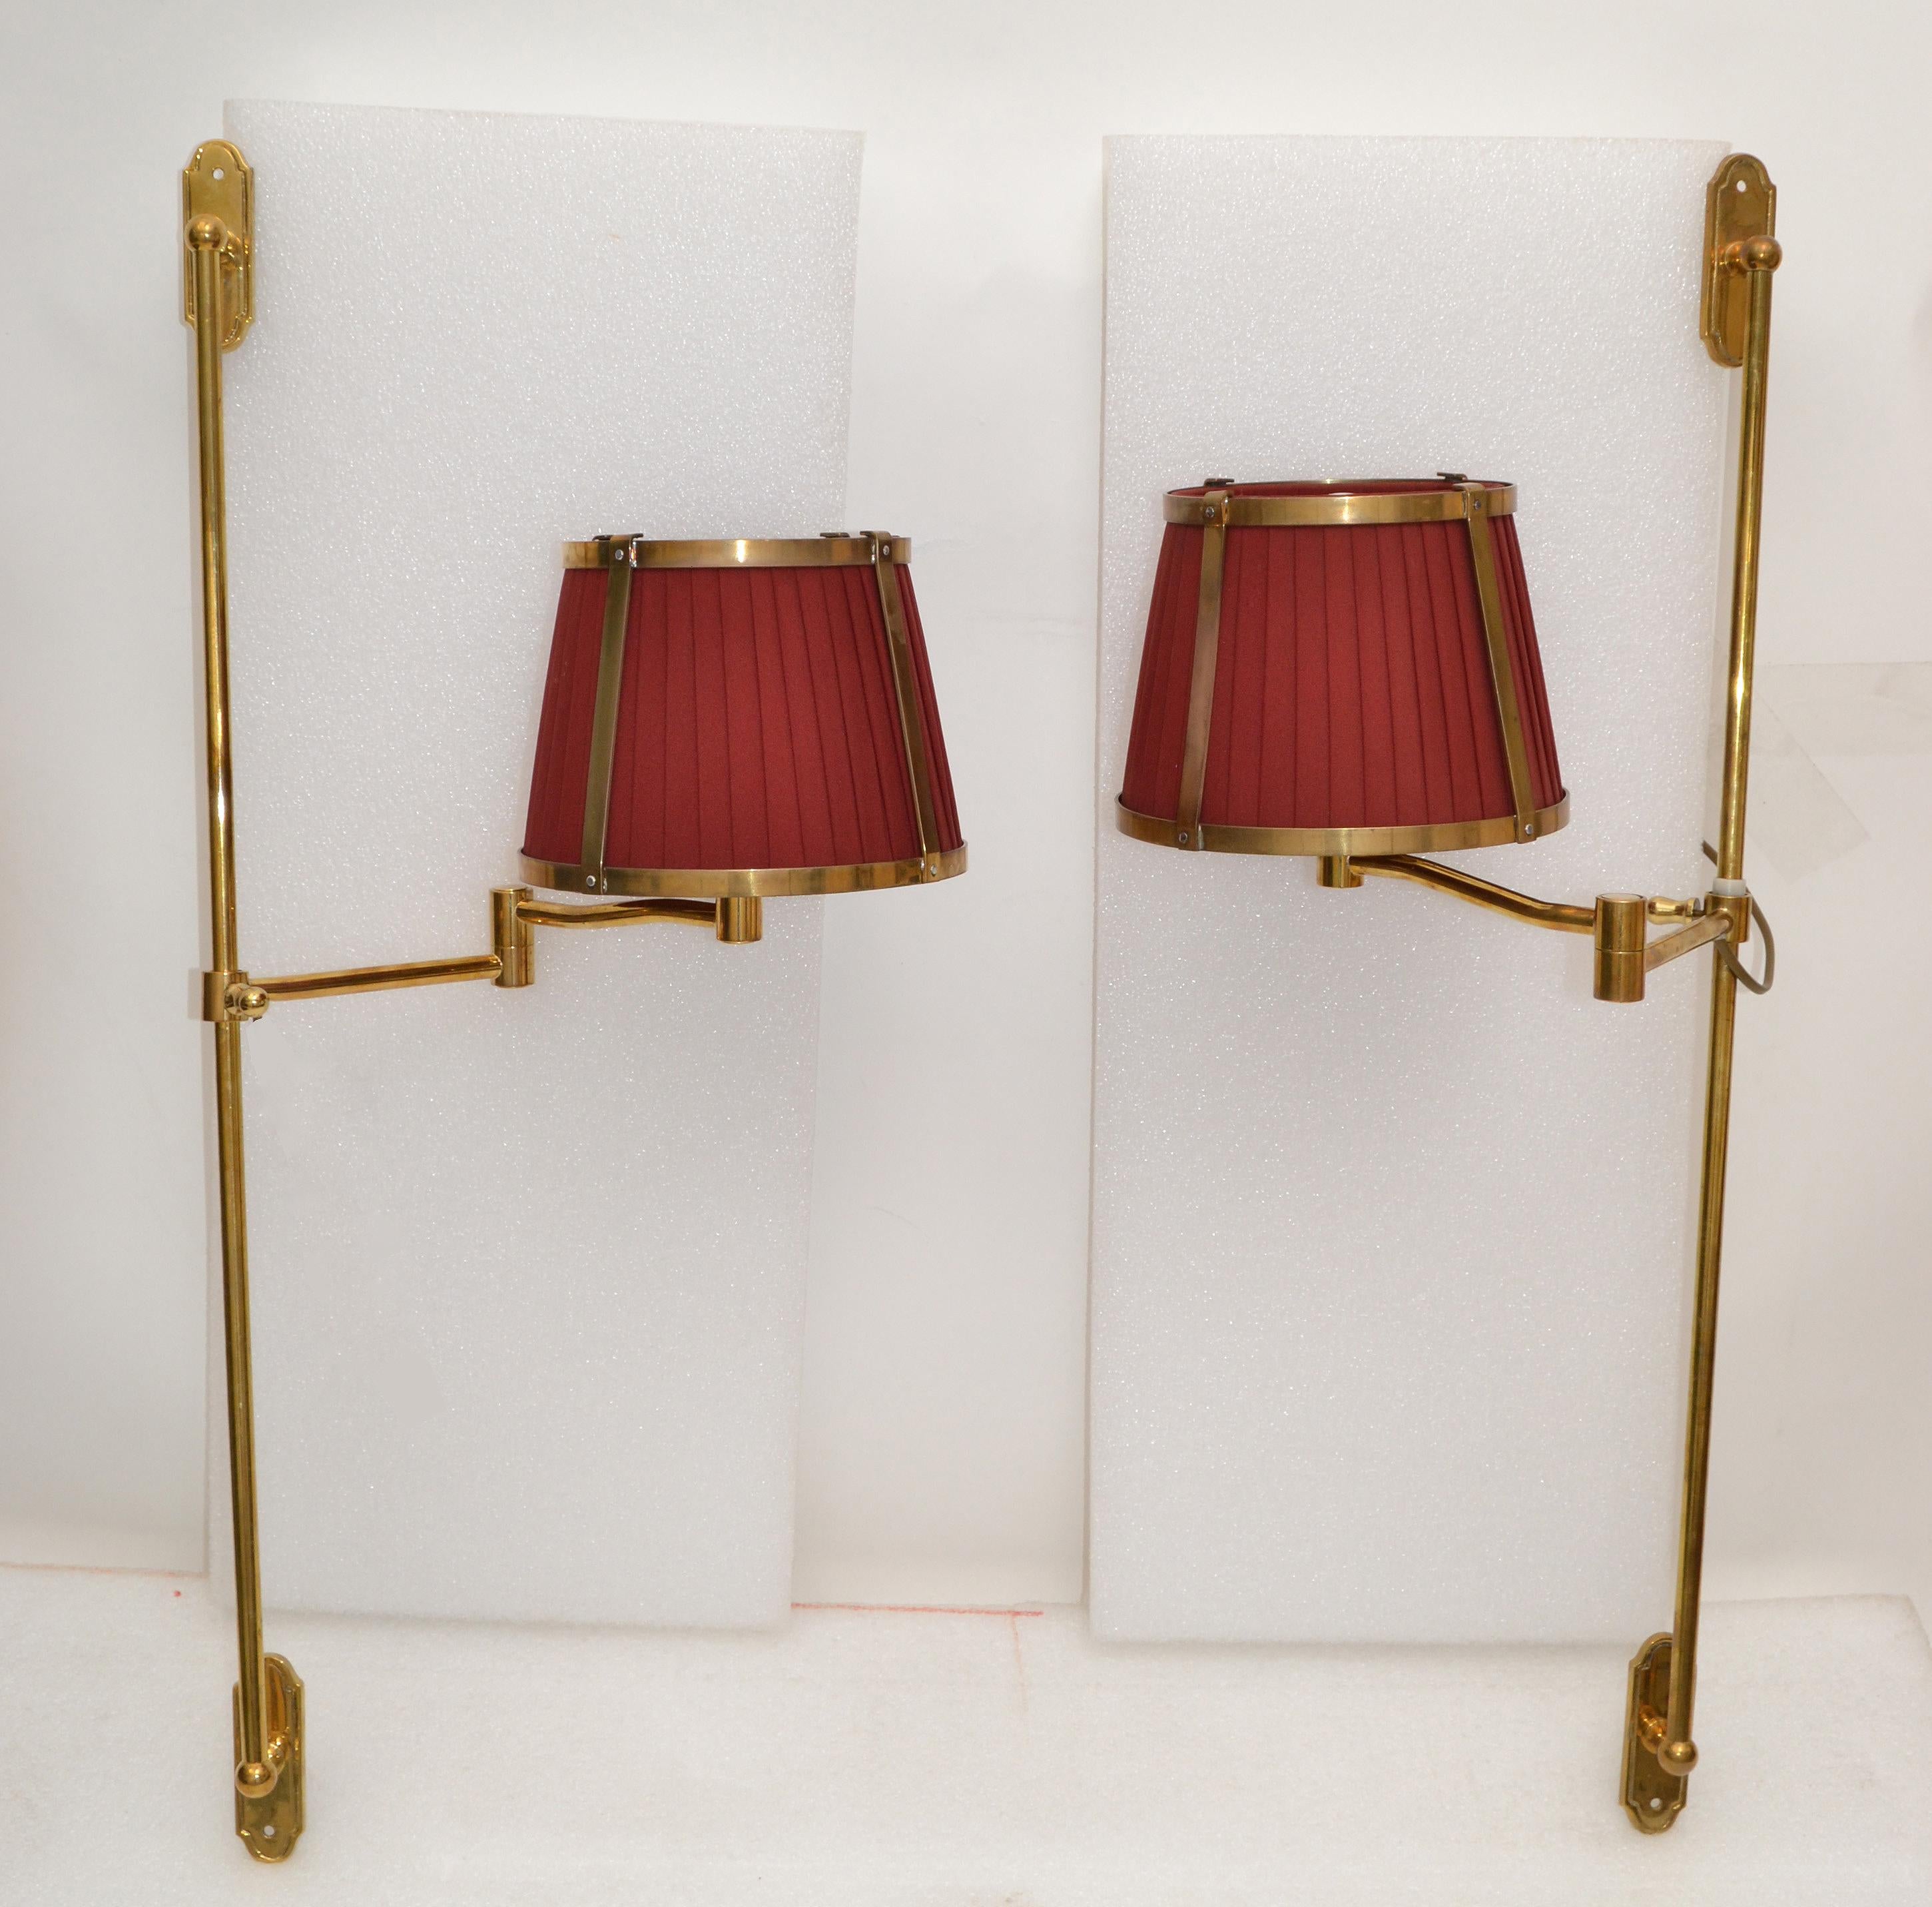 Pair Marina Retractable Swing Arm Sconces Original Brass Shades 2 Sets Available 6